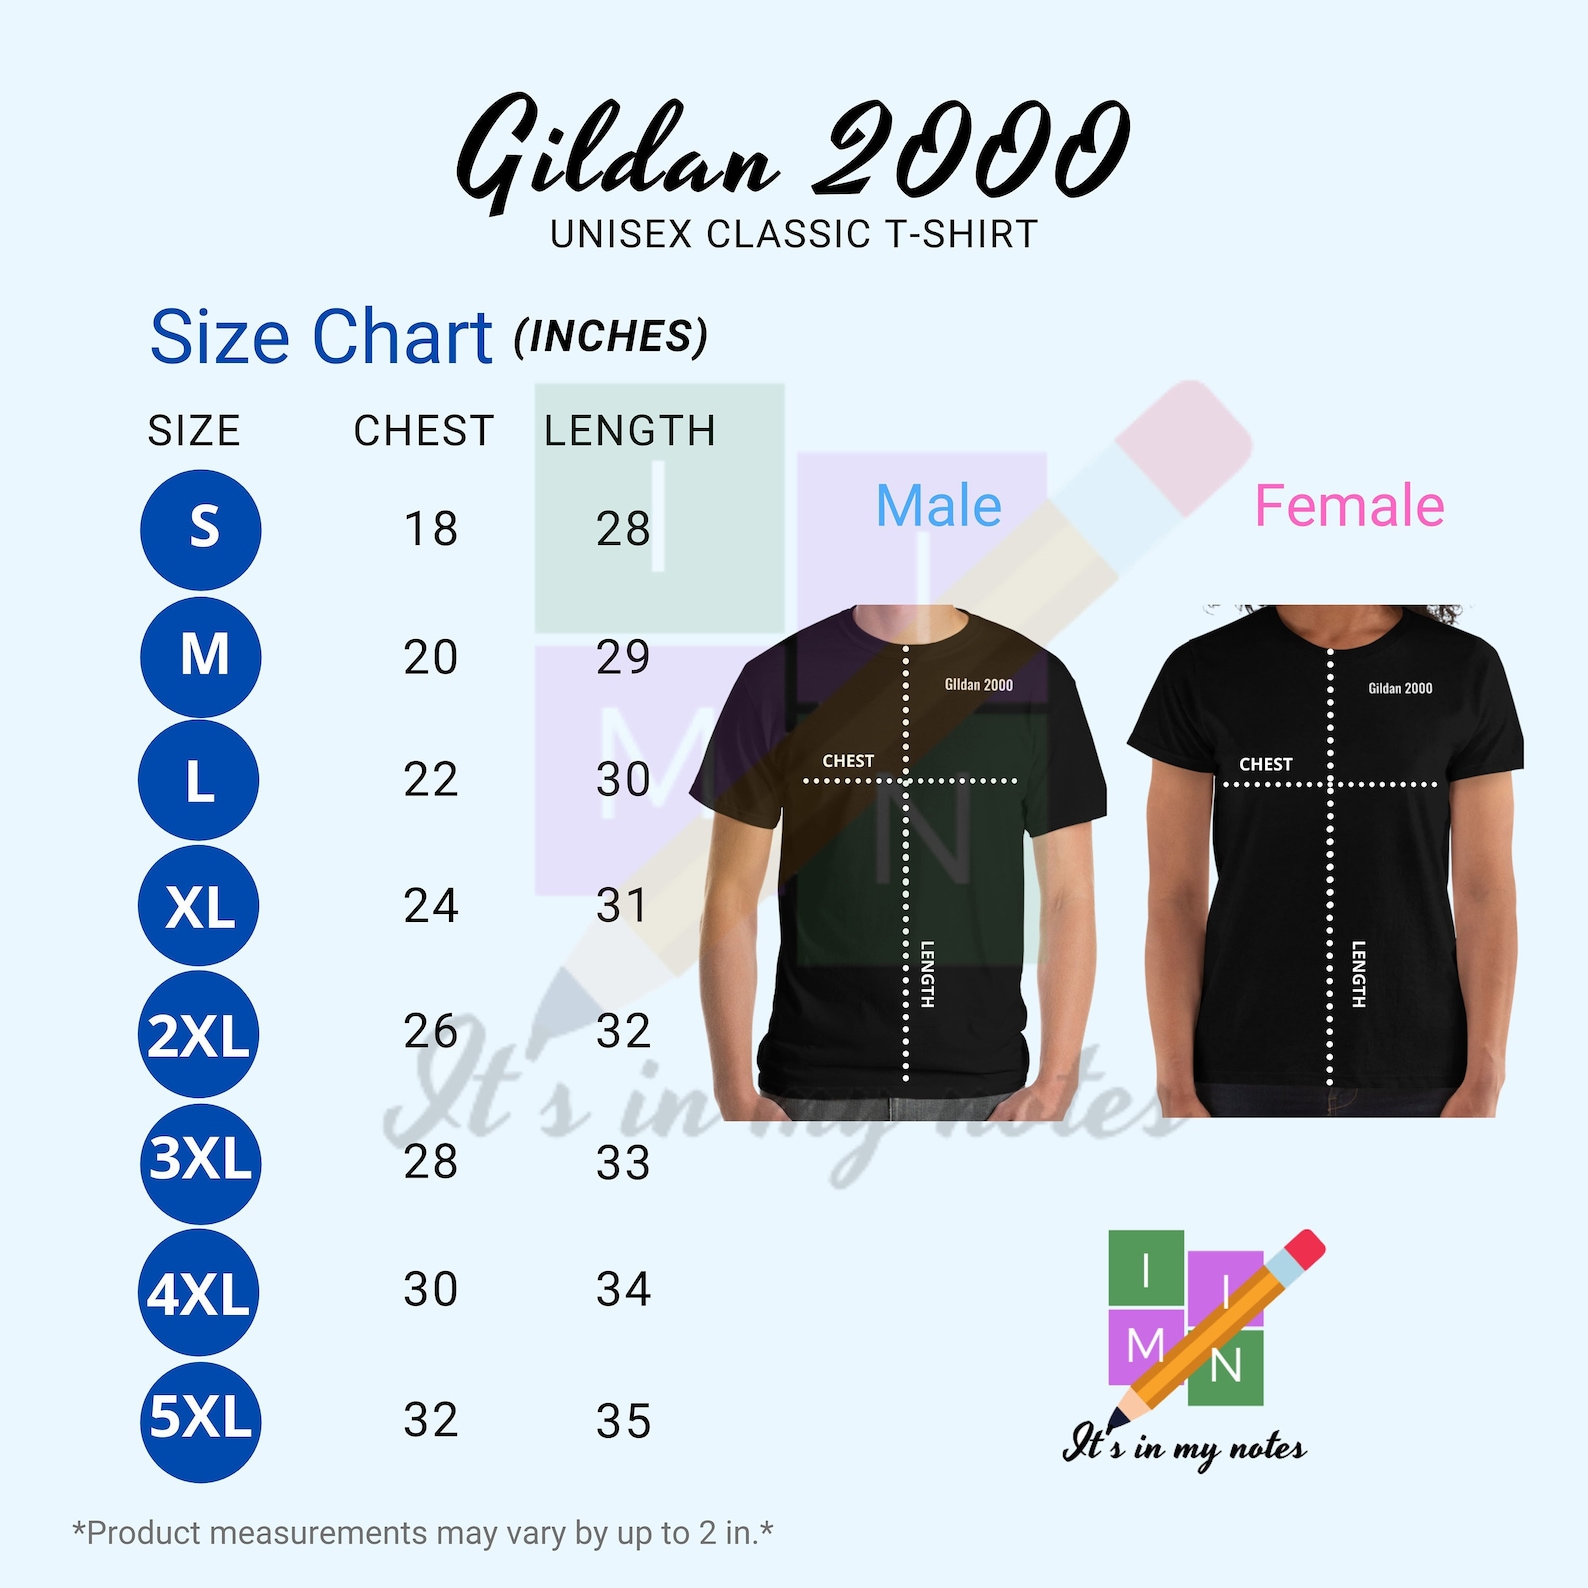 gildan-2000-unisex-classic-t-shirt-size-chart-in-inches-and-cm-etsy